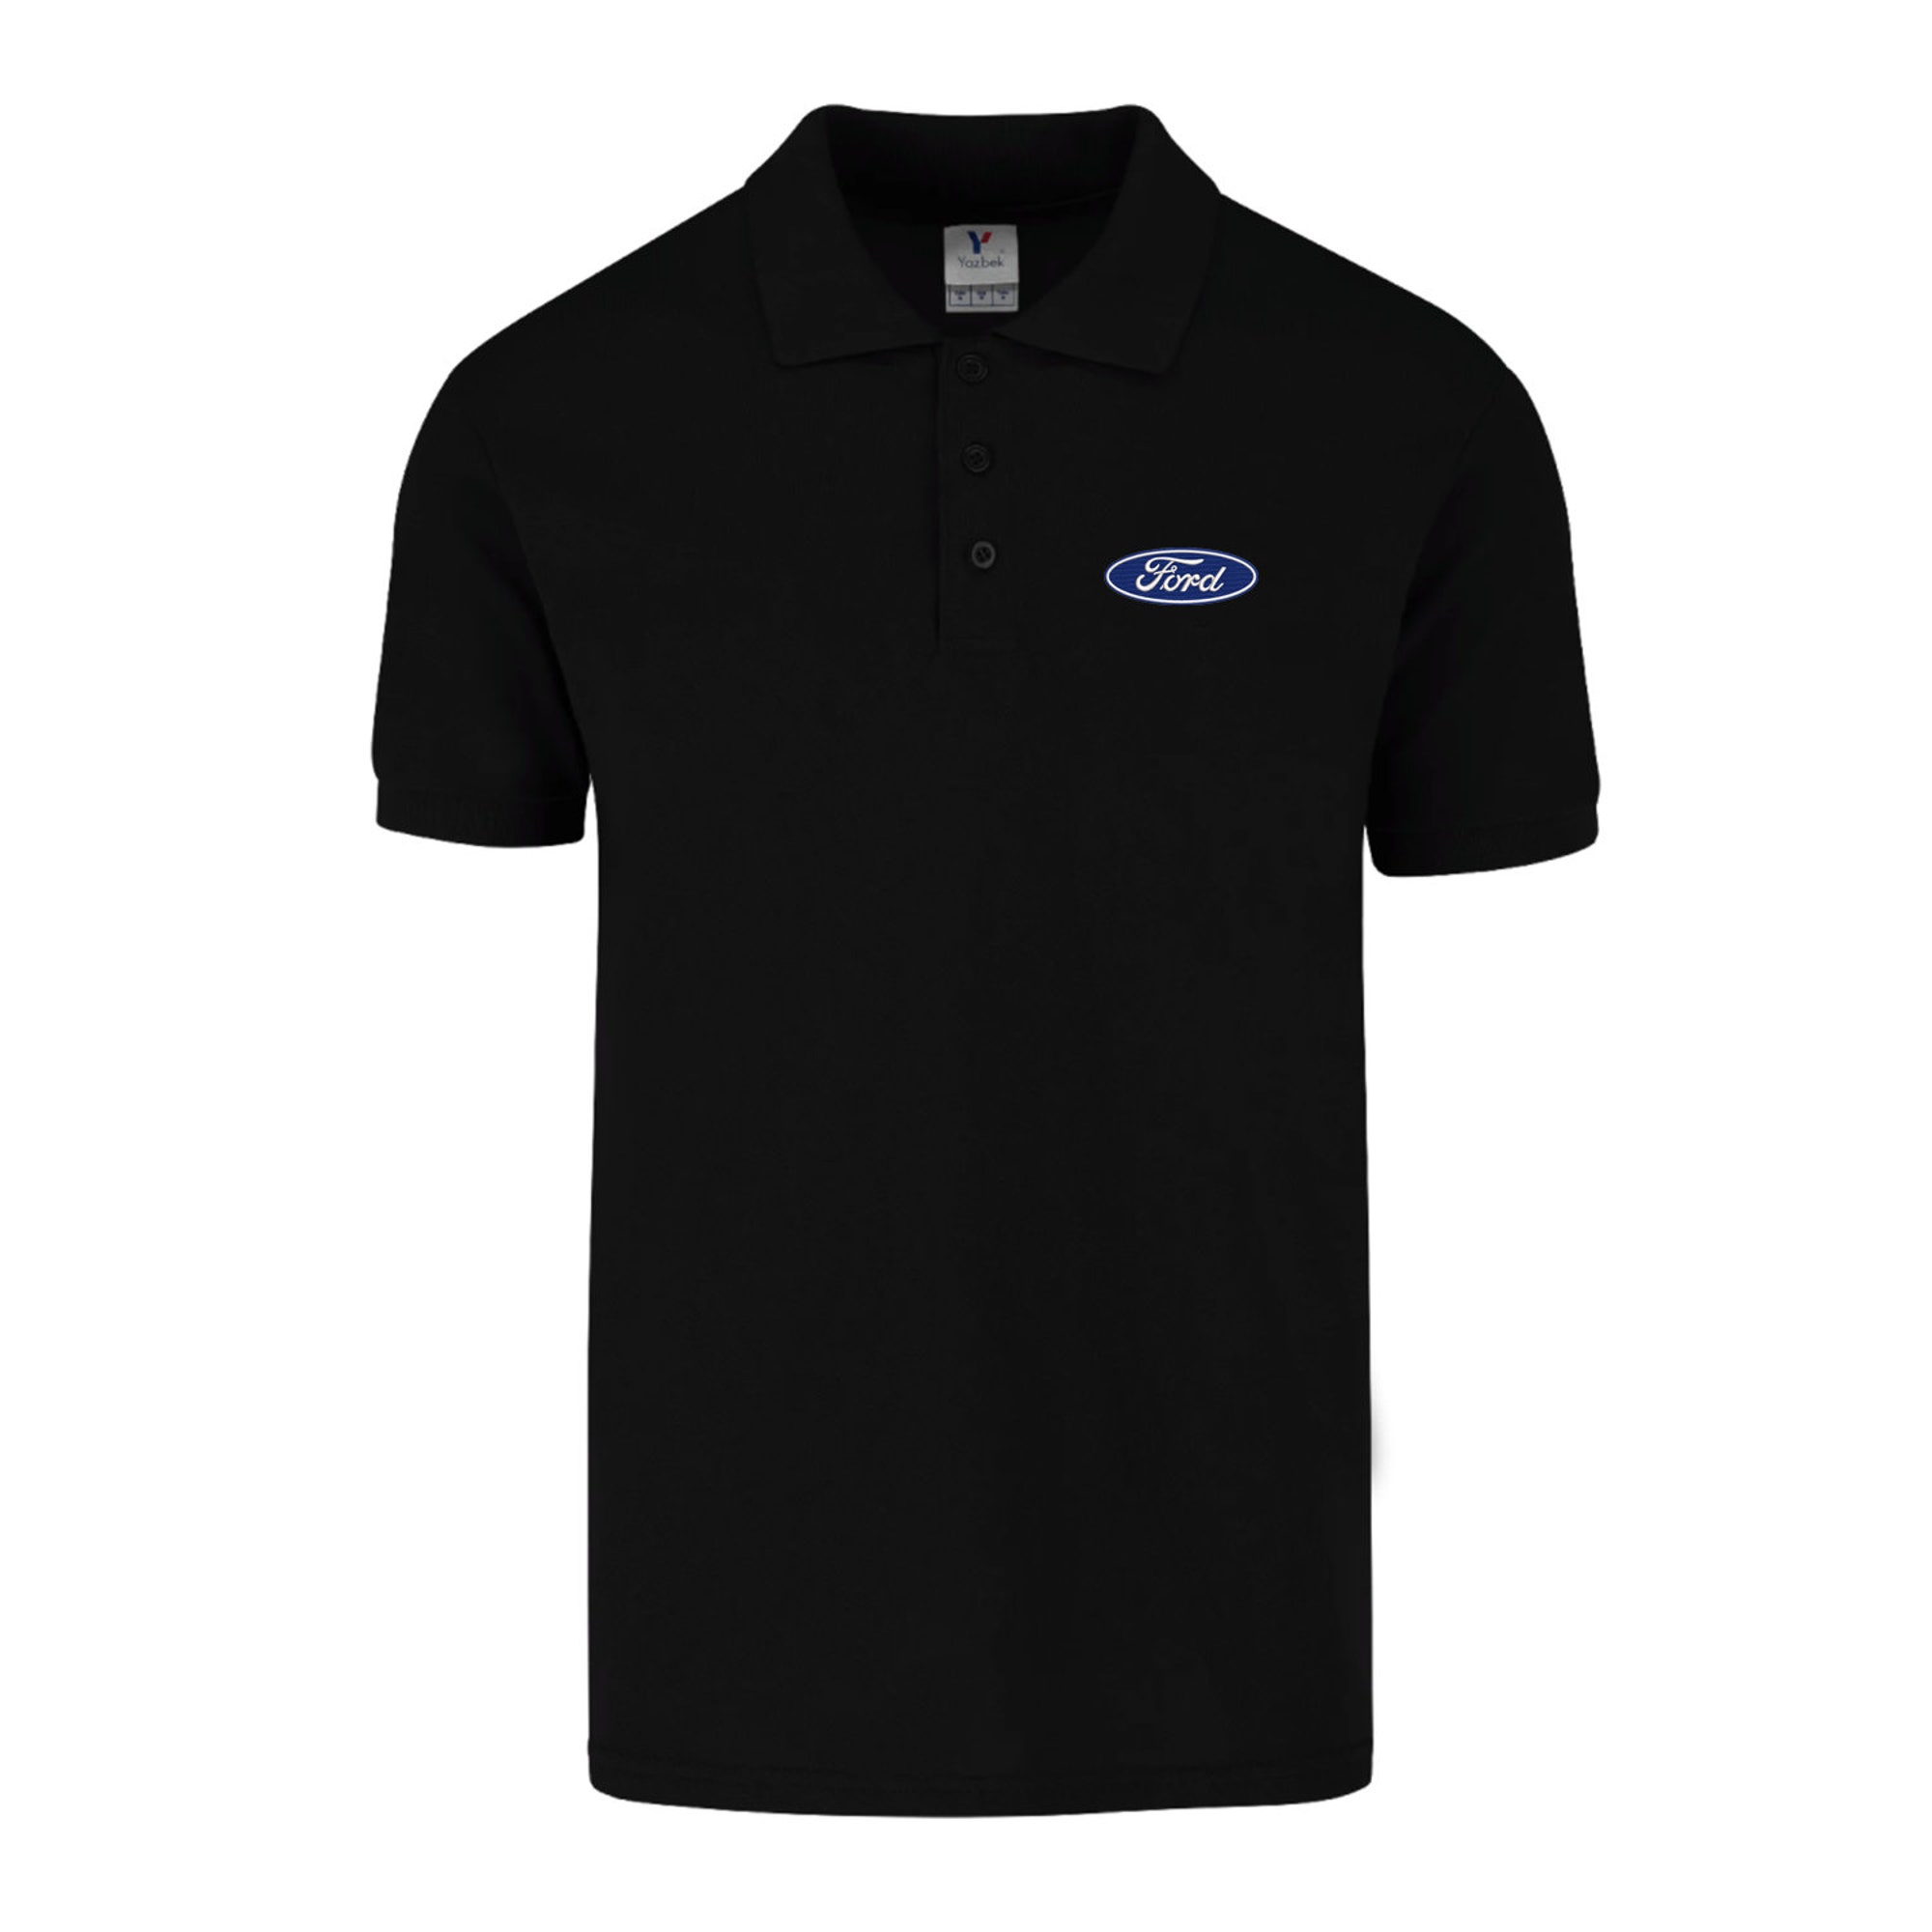 Ford Logo Polo Embroidery Shirt Men Fitted Solid Colors Cotton